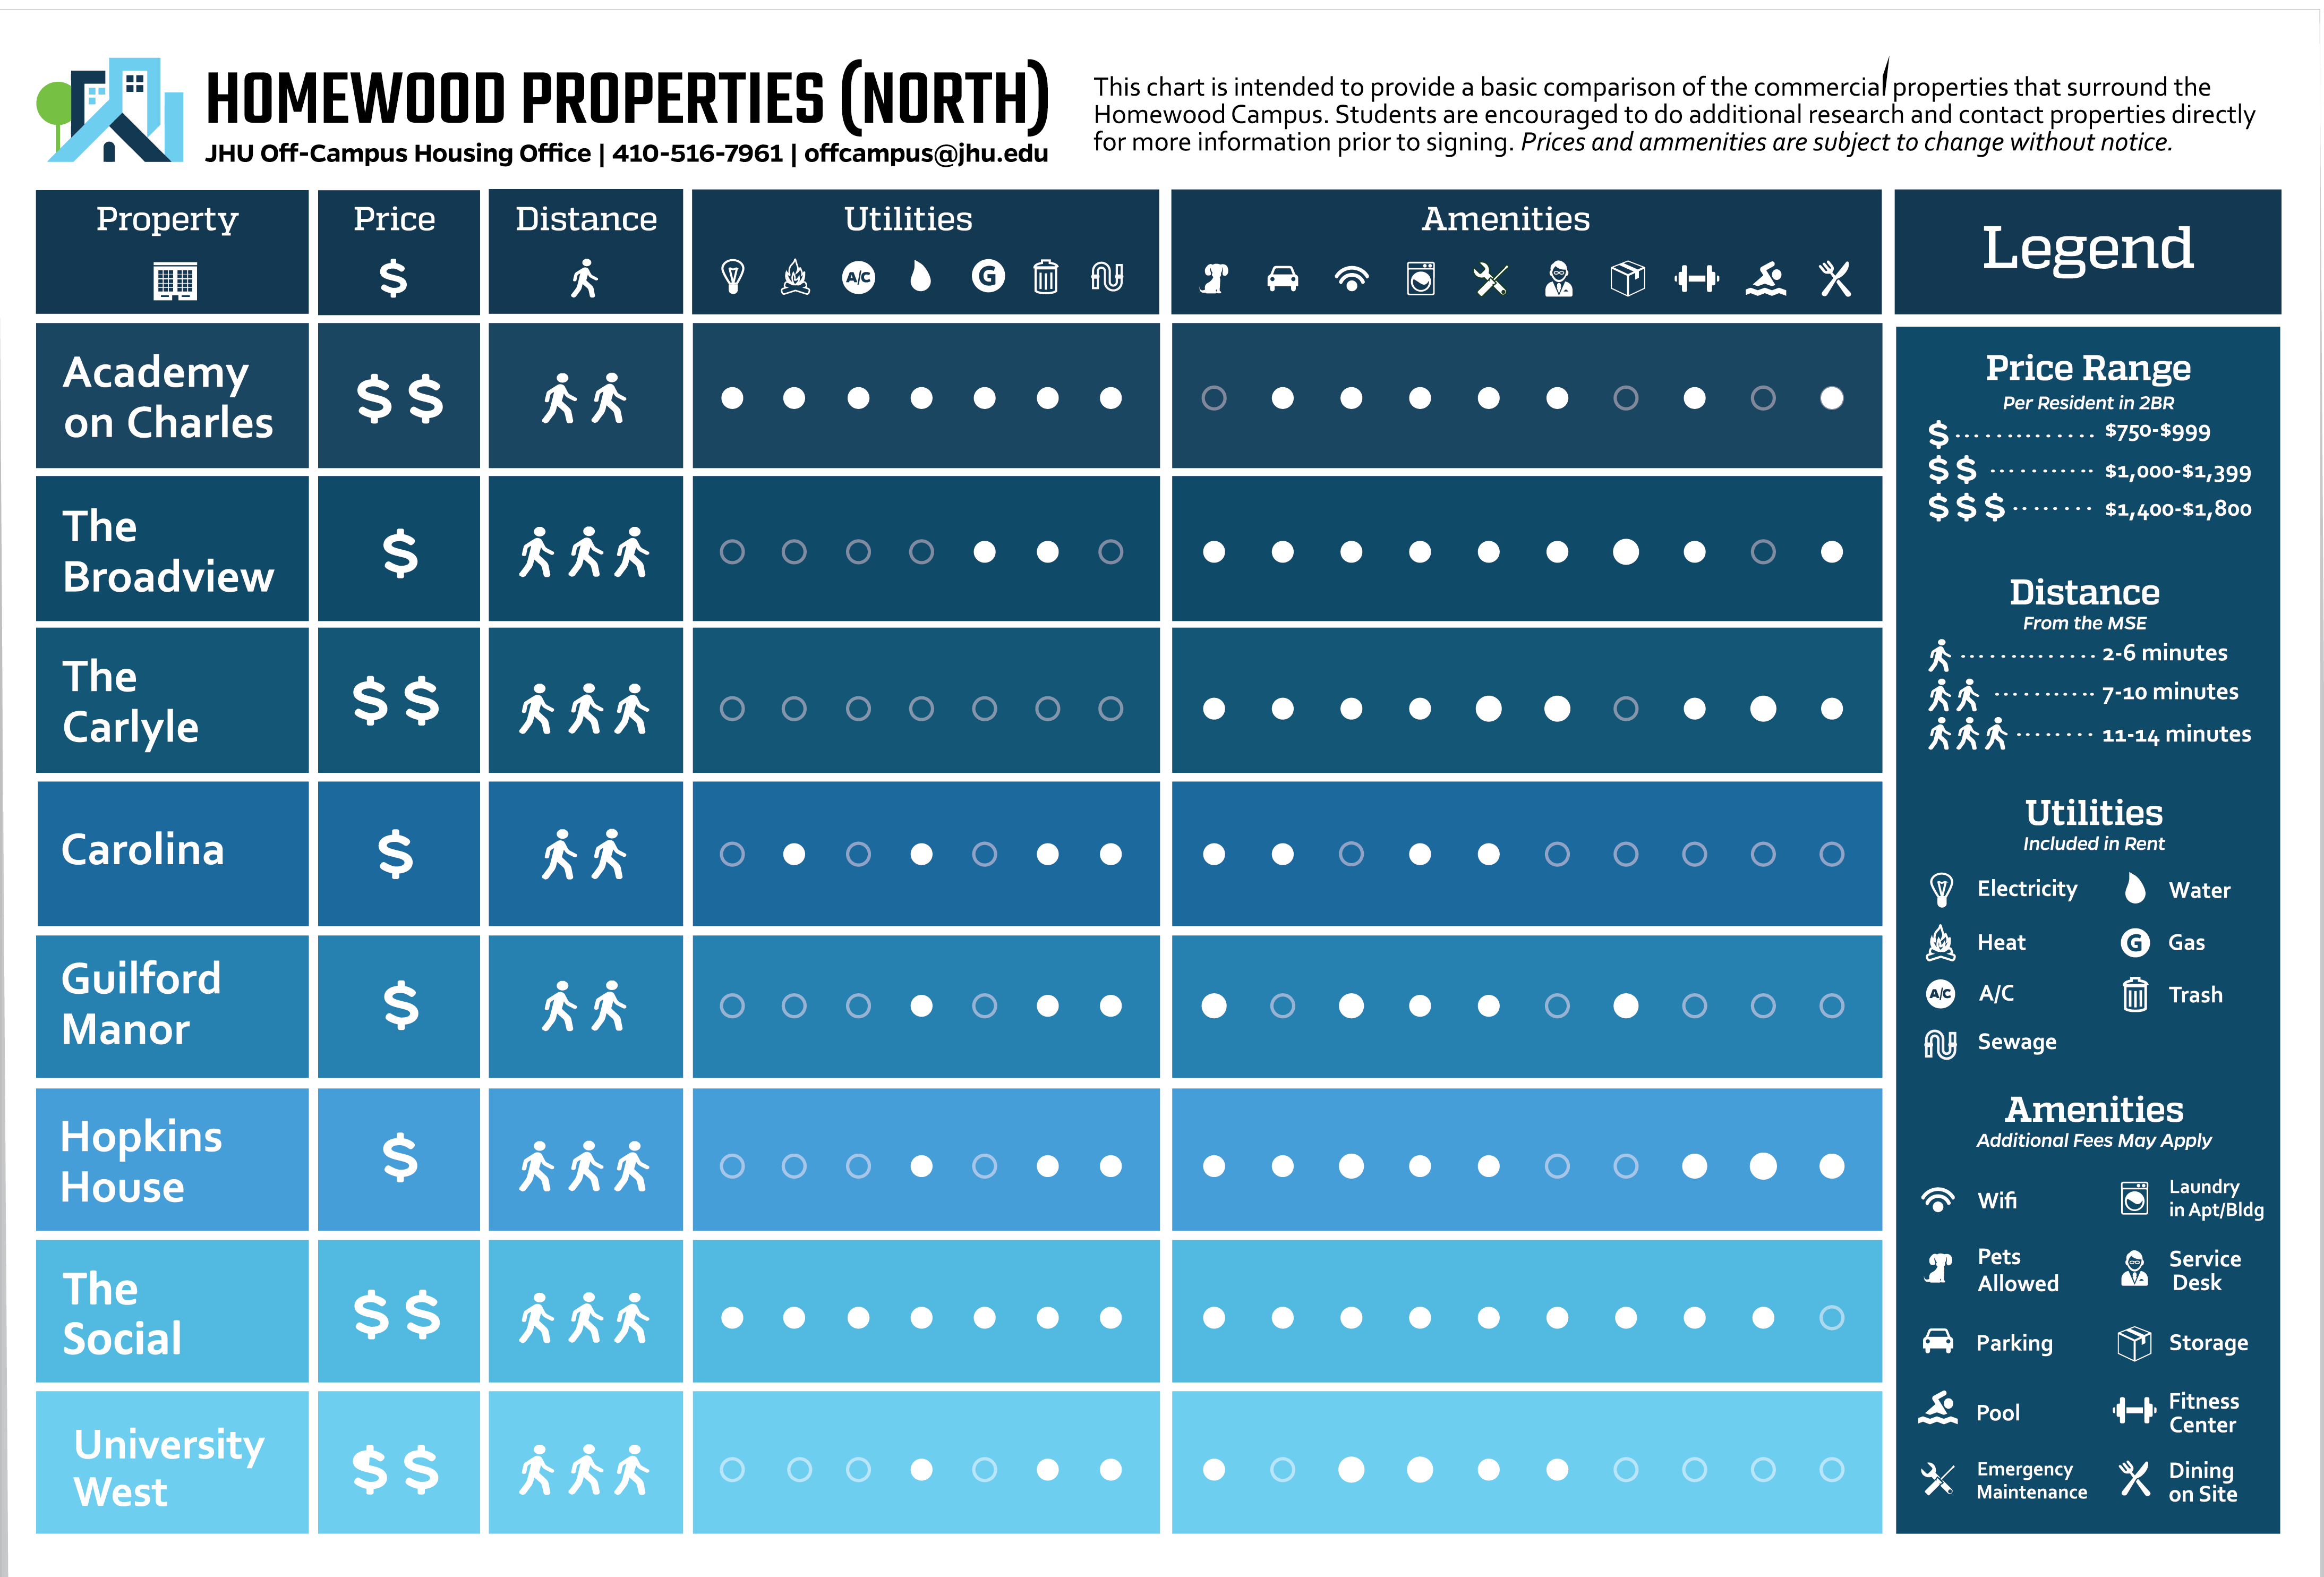 Comparison chart of north properties and their amenities near Homewood campus.